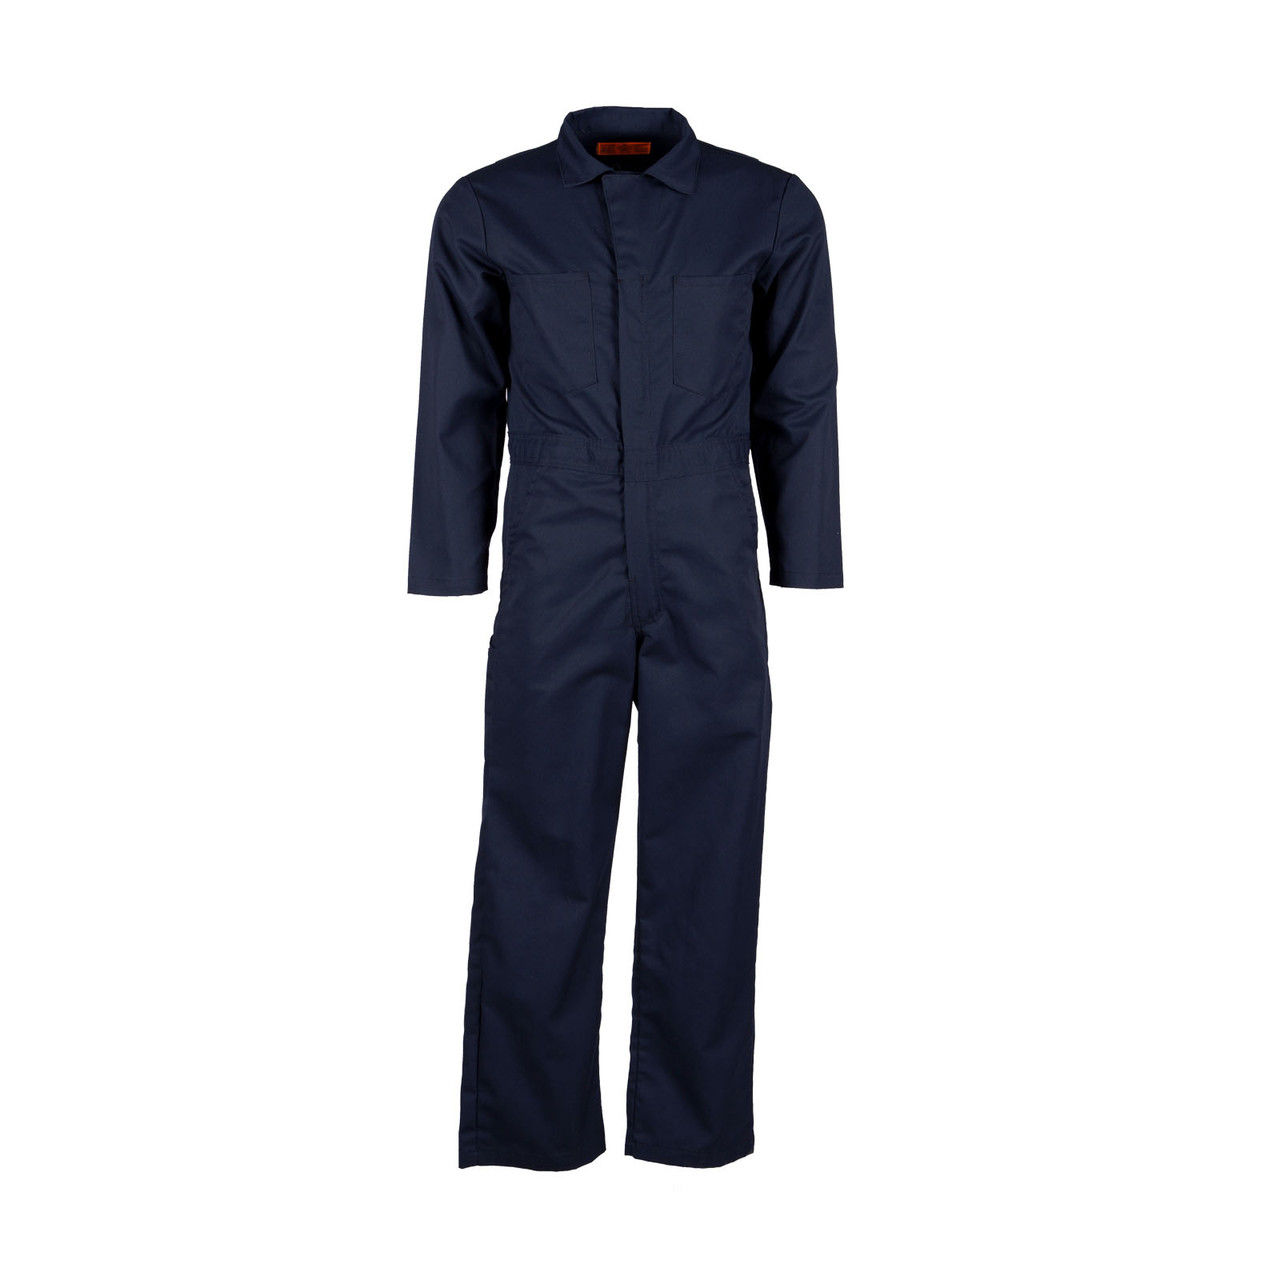 Can you provide a description of the navy coveralls, specifically the CV10NV model by Pinnacle Textile?